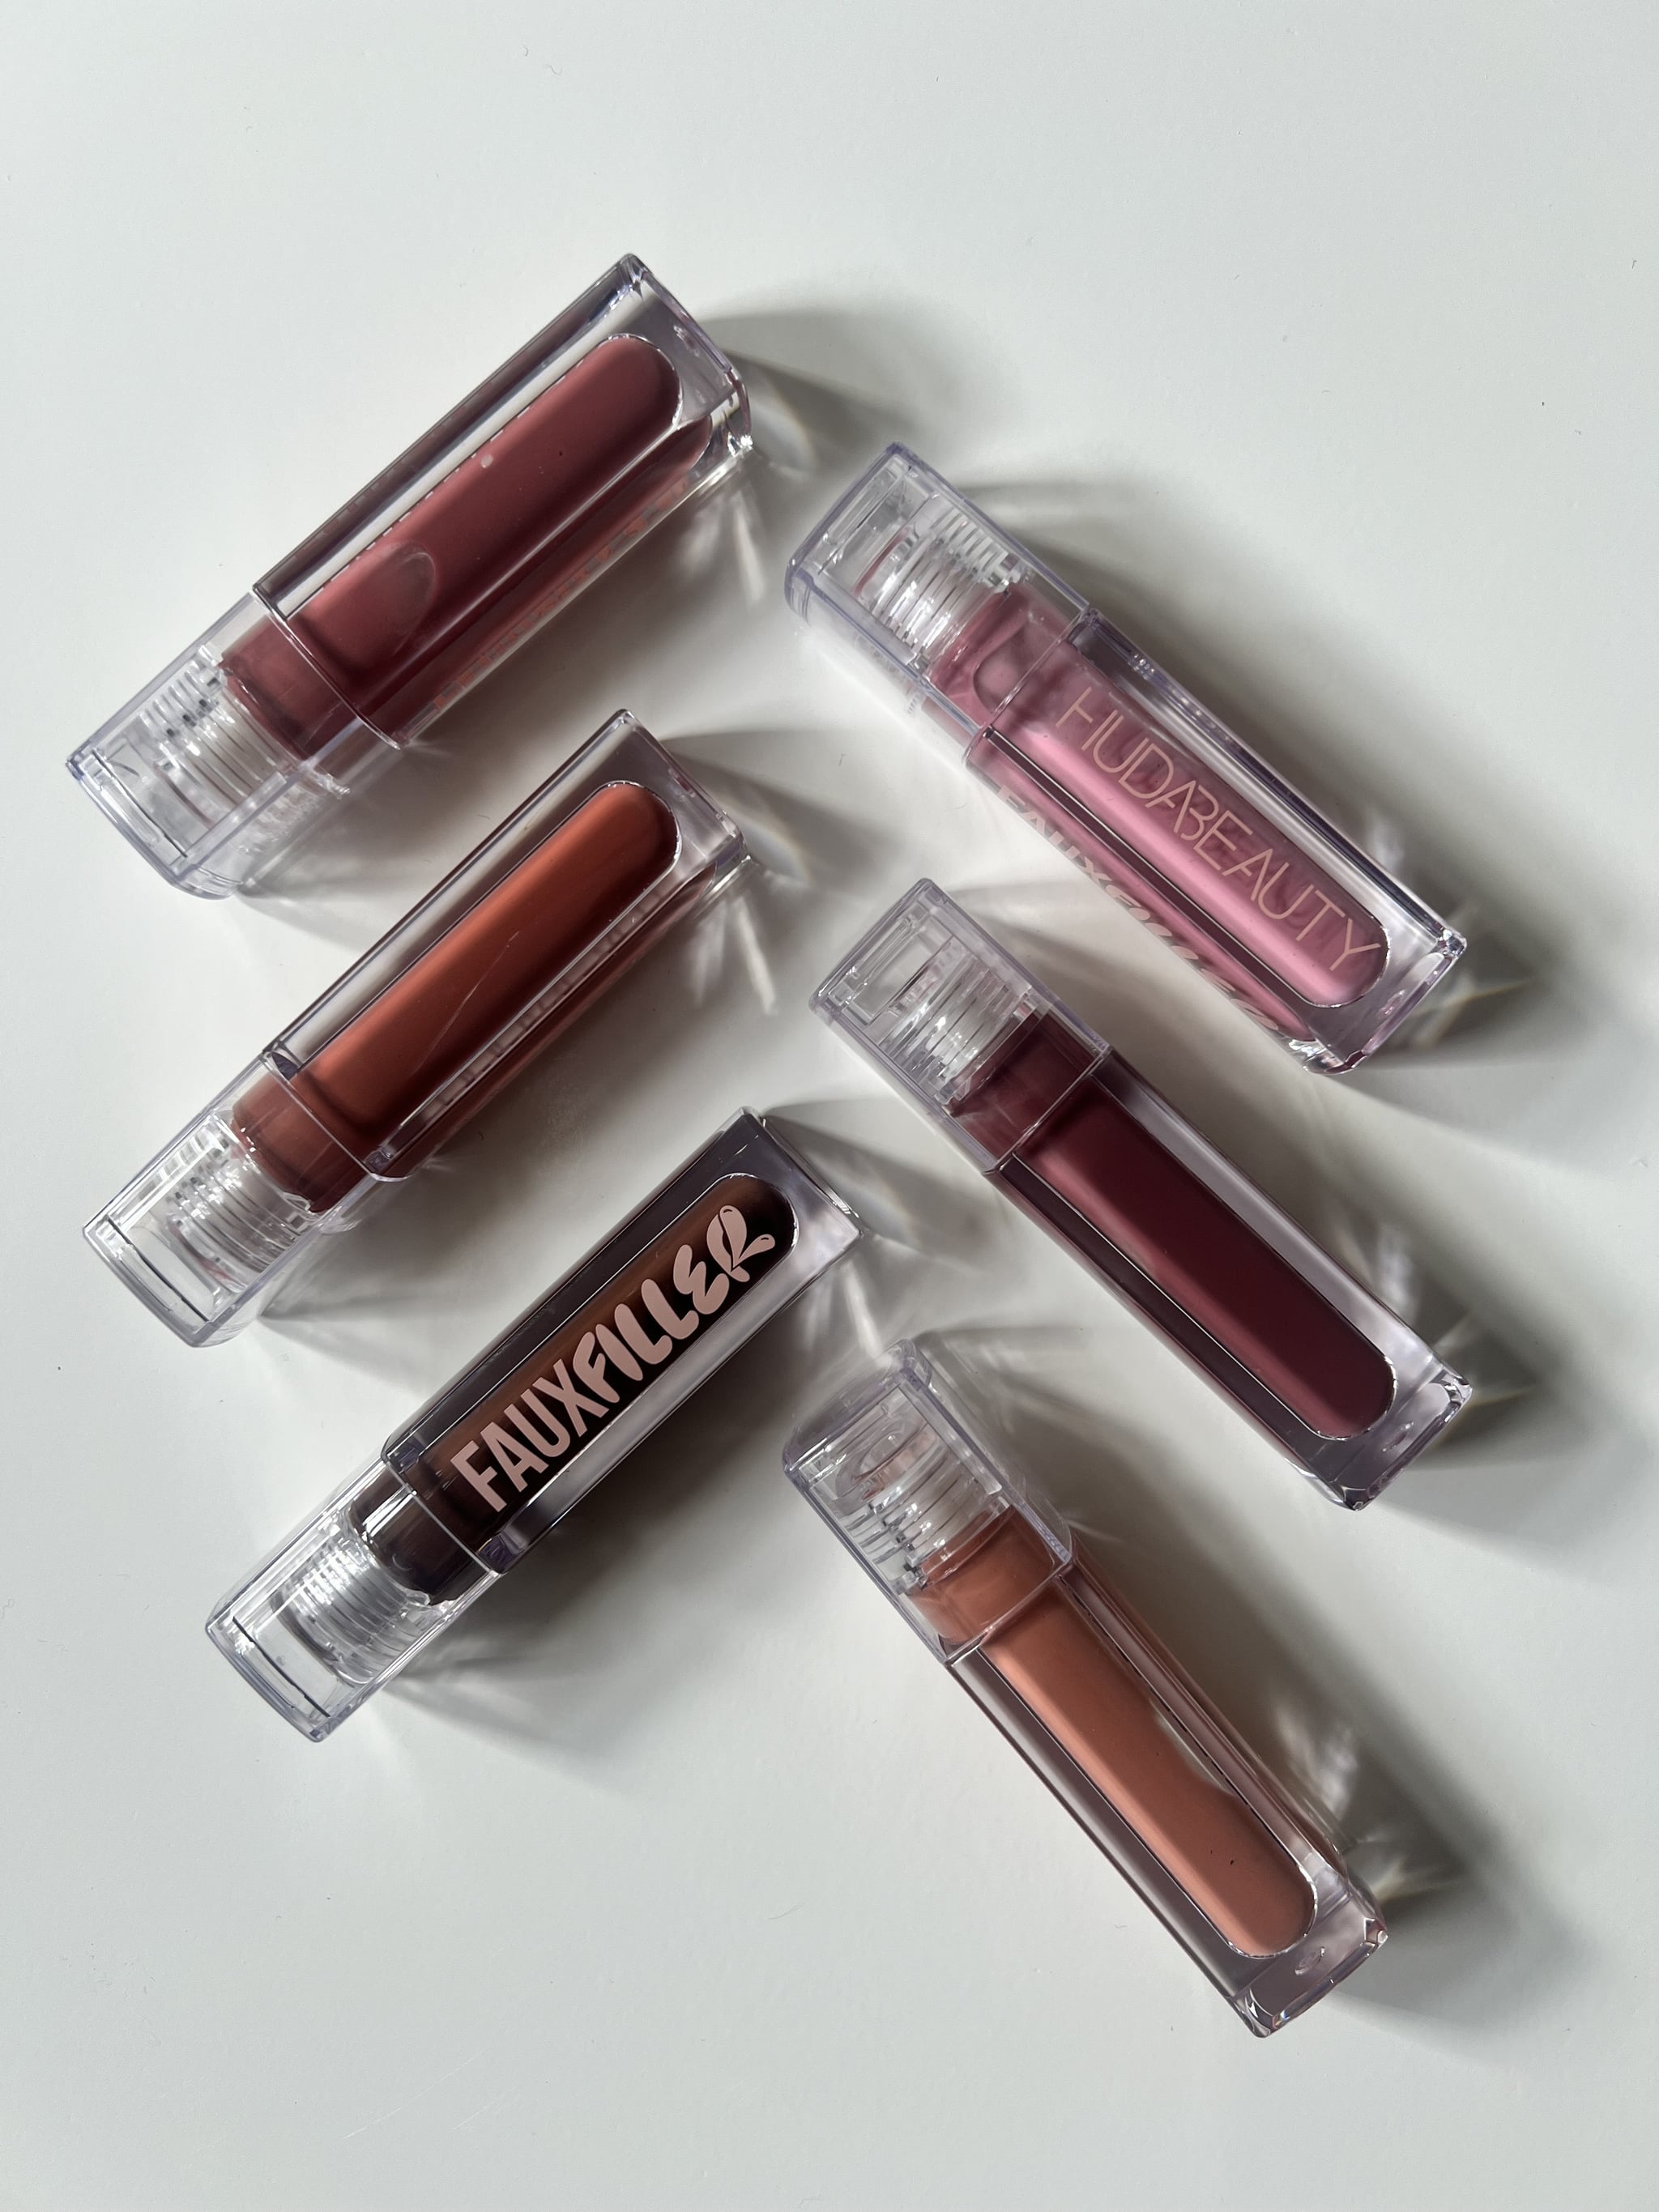 The Huda Beauty Faux Filler Extra Shine Lip Glosses in all six shades.